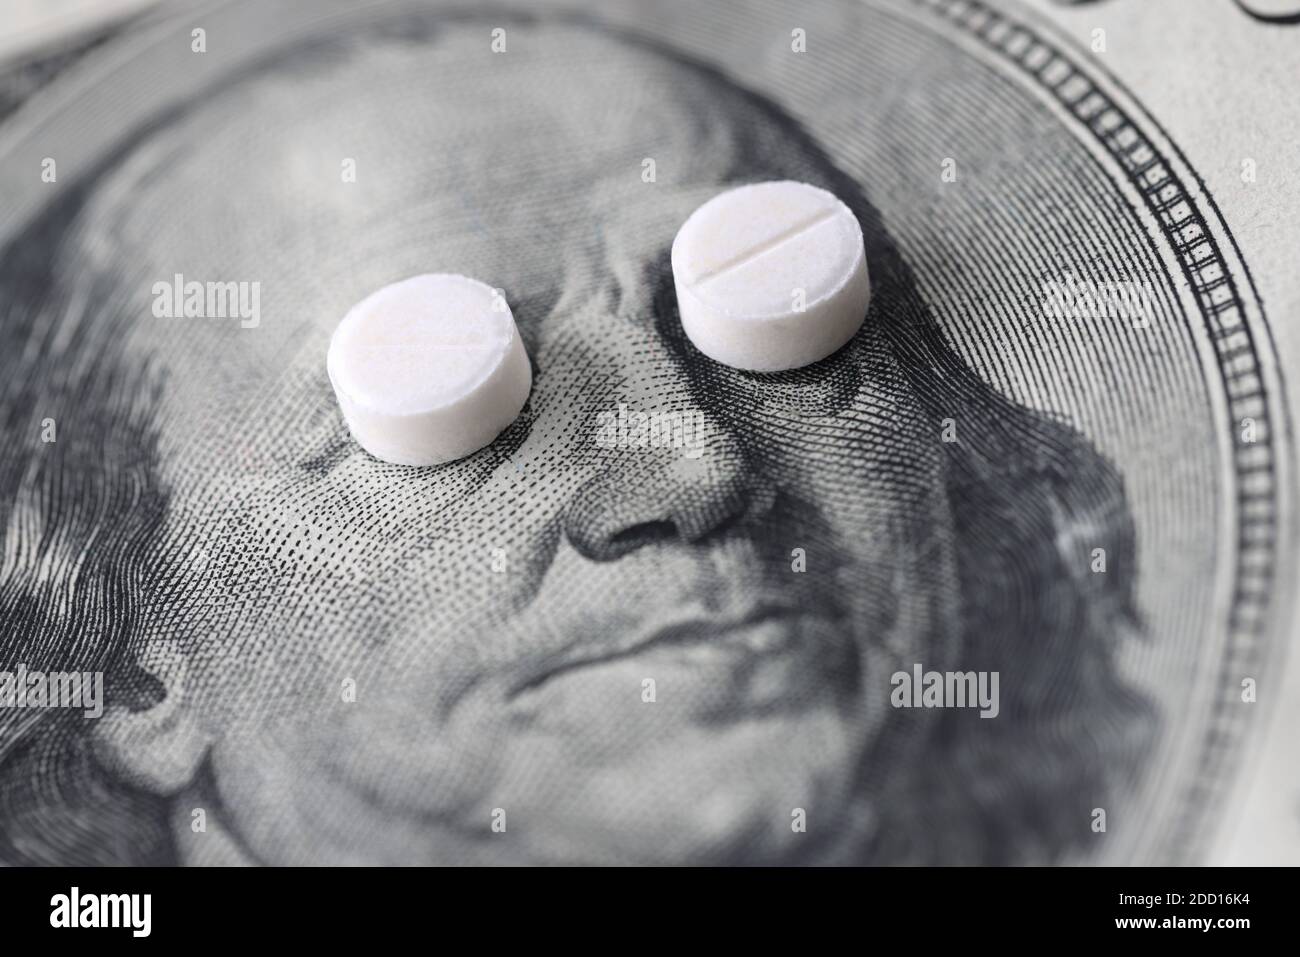 Two small white pills lying on dollar bill close-up Stock Photo